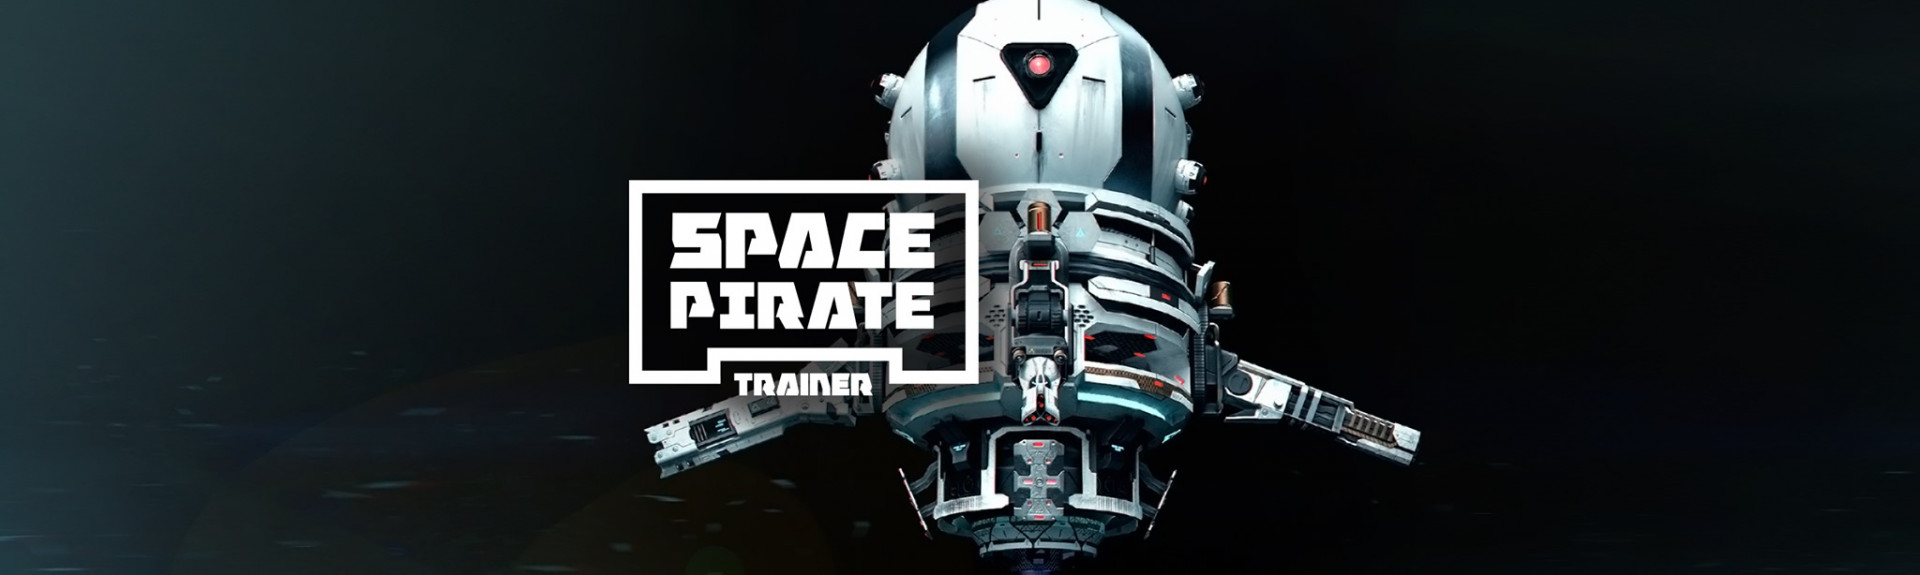 Space Pirate Trainer DX: ANÁLISIS